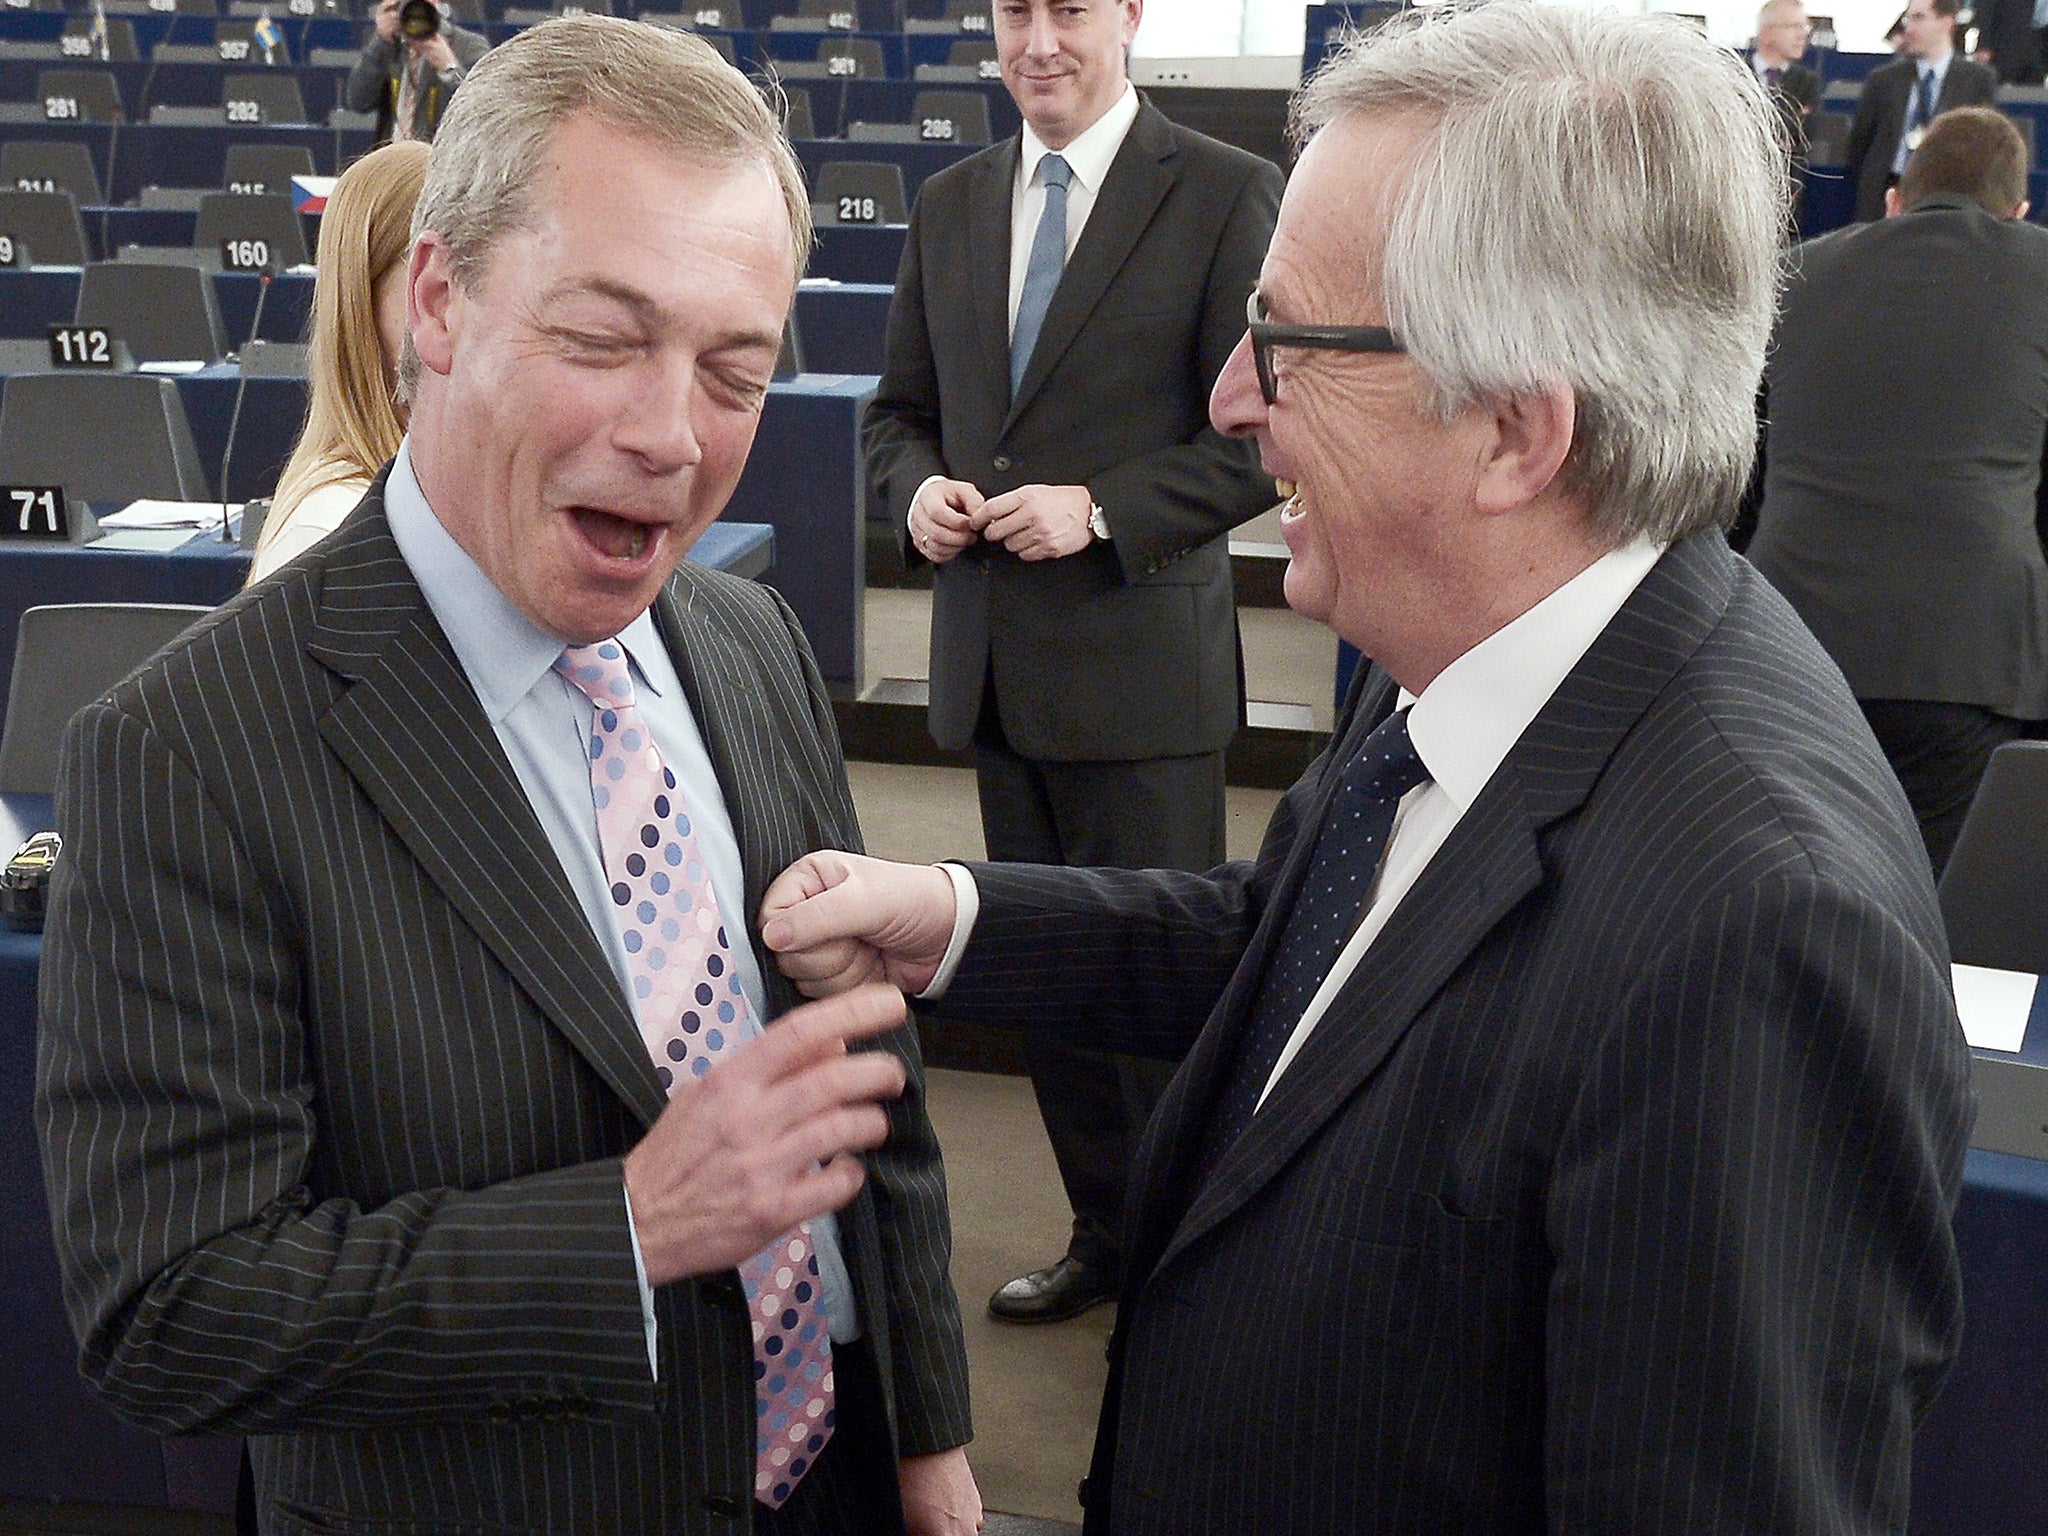 Nigel Farage and Jean Claude Juncker share a joke at the European Parliament in Strasbourg, France, on Wednesday